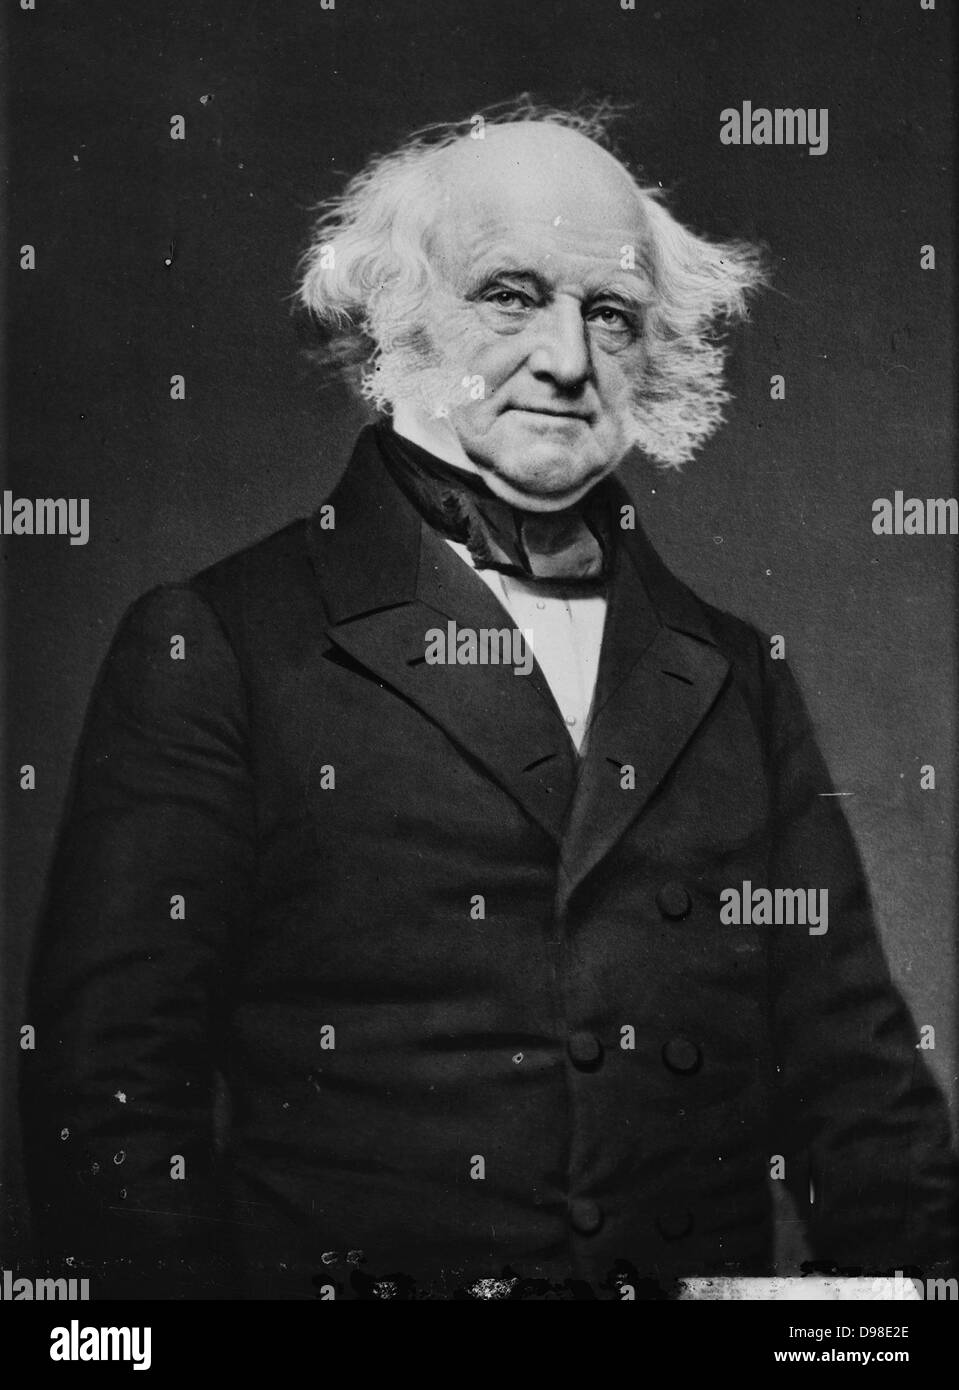 Martin Van Buren (1782-1862) Eighth President of the United States of America (1837-1841), the first President to be born an American citizen. Photograph. Stock Photo